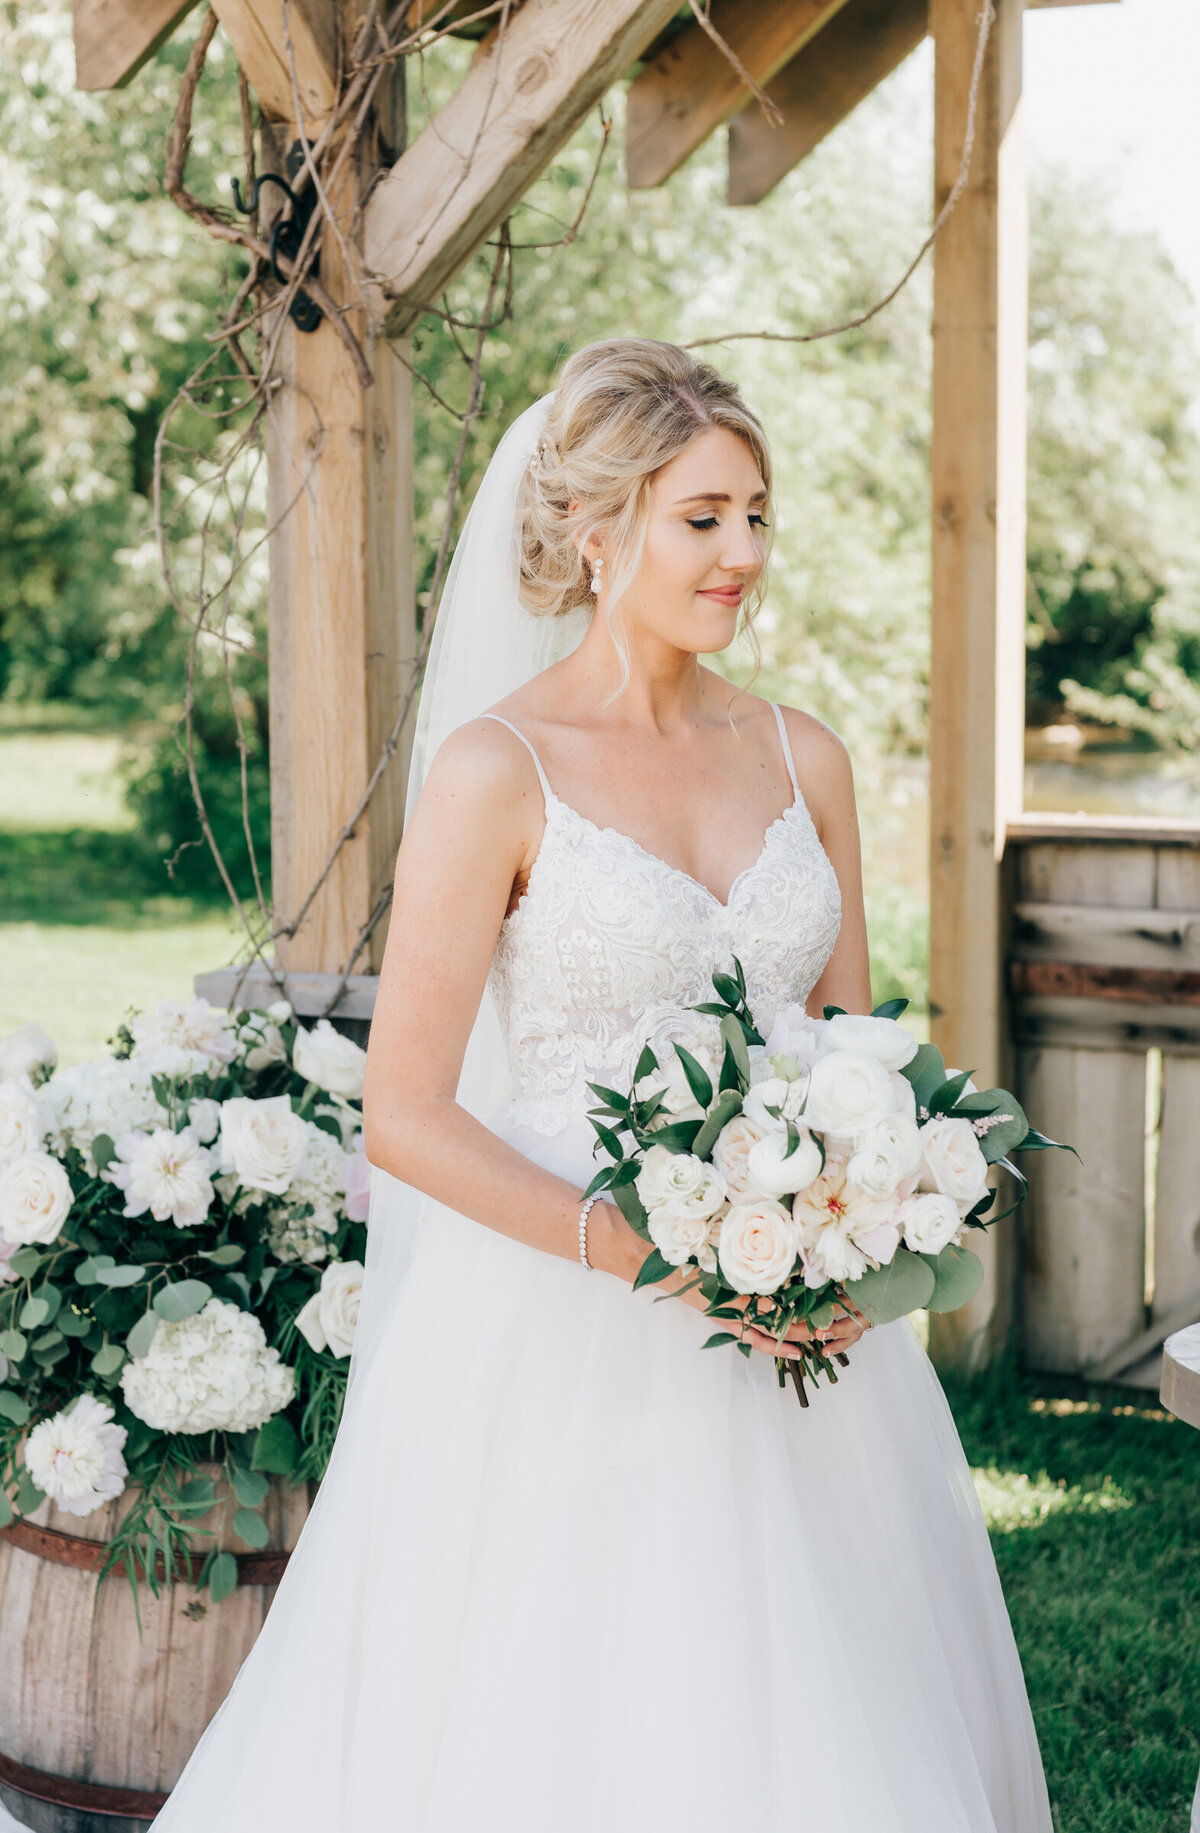 Glamorous bride holding bouquet of white florals and eucalyptus at outdoor wedding ceremony